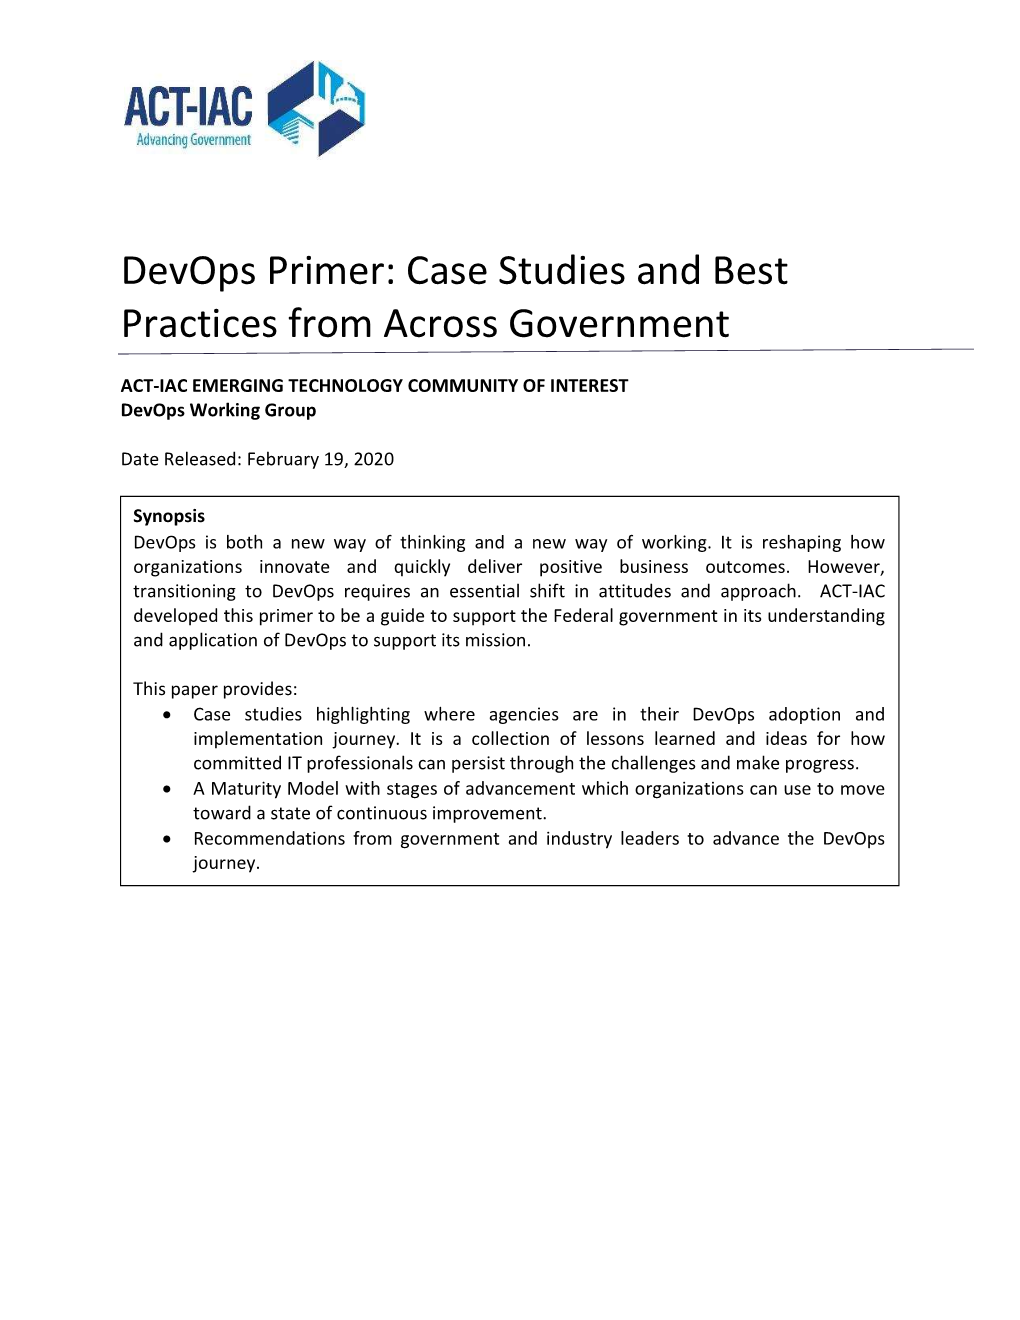 Devops Primer: Case Studies and Best Practices from Across Government